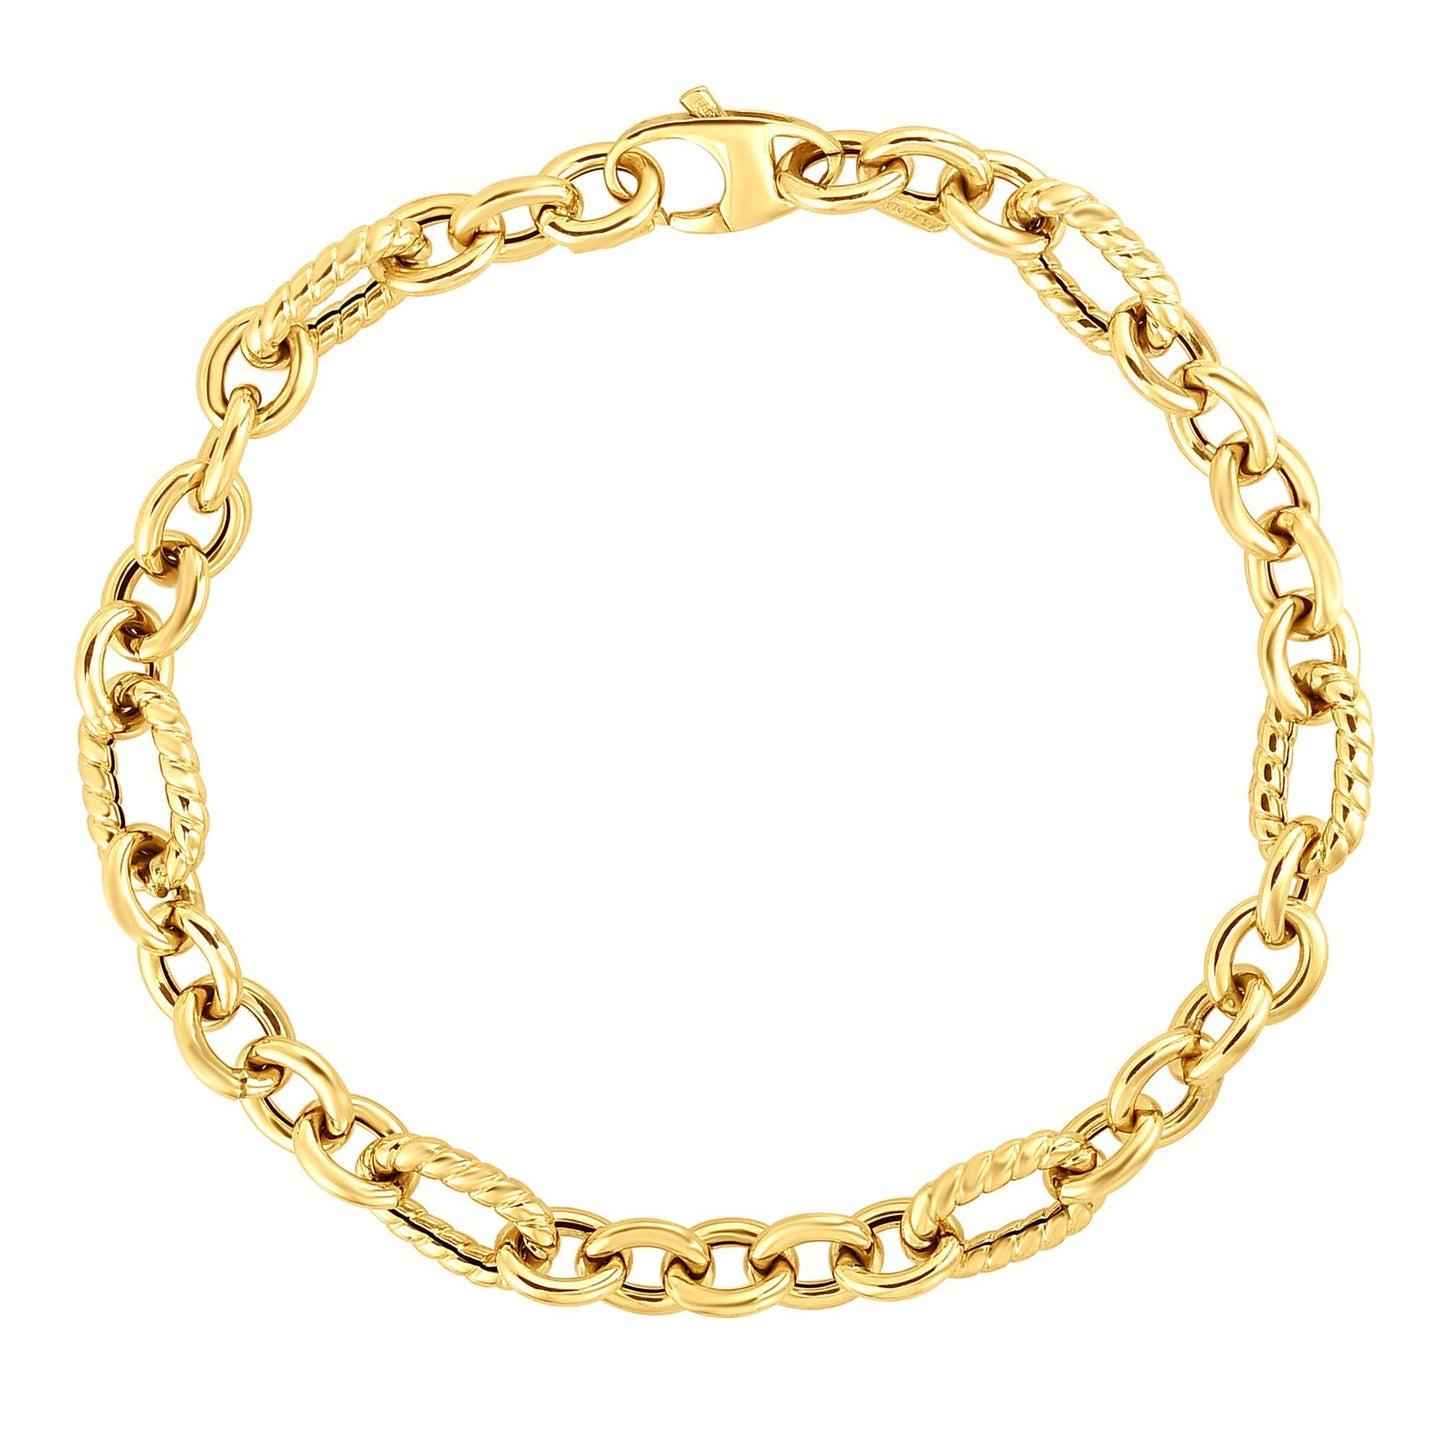 14K Gold Textured Oval Fancy Bracelet with Lobster Clasp